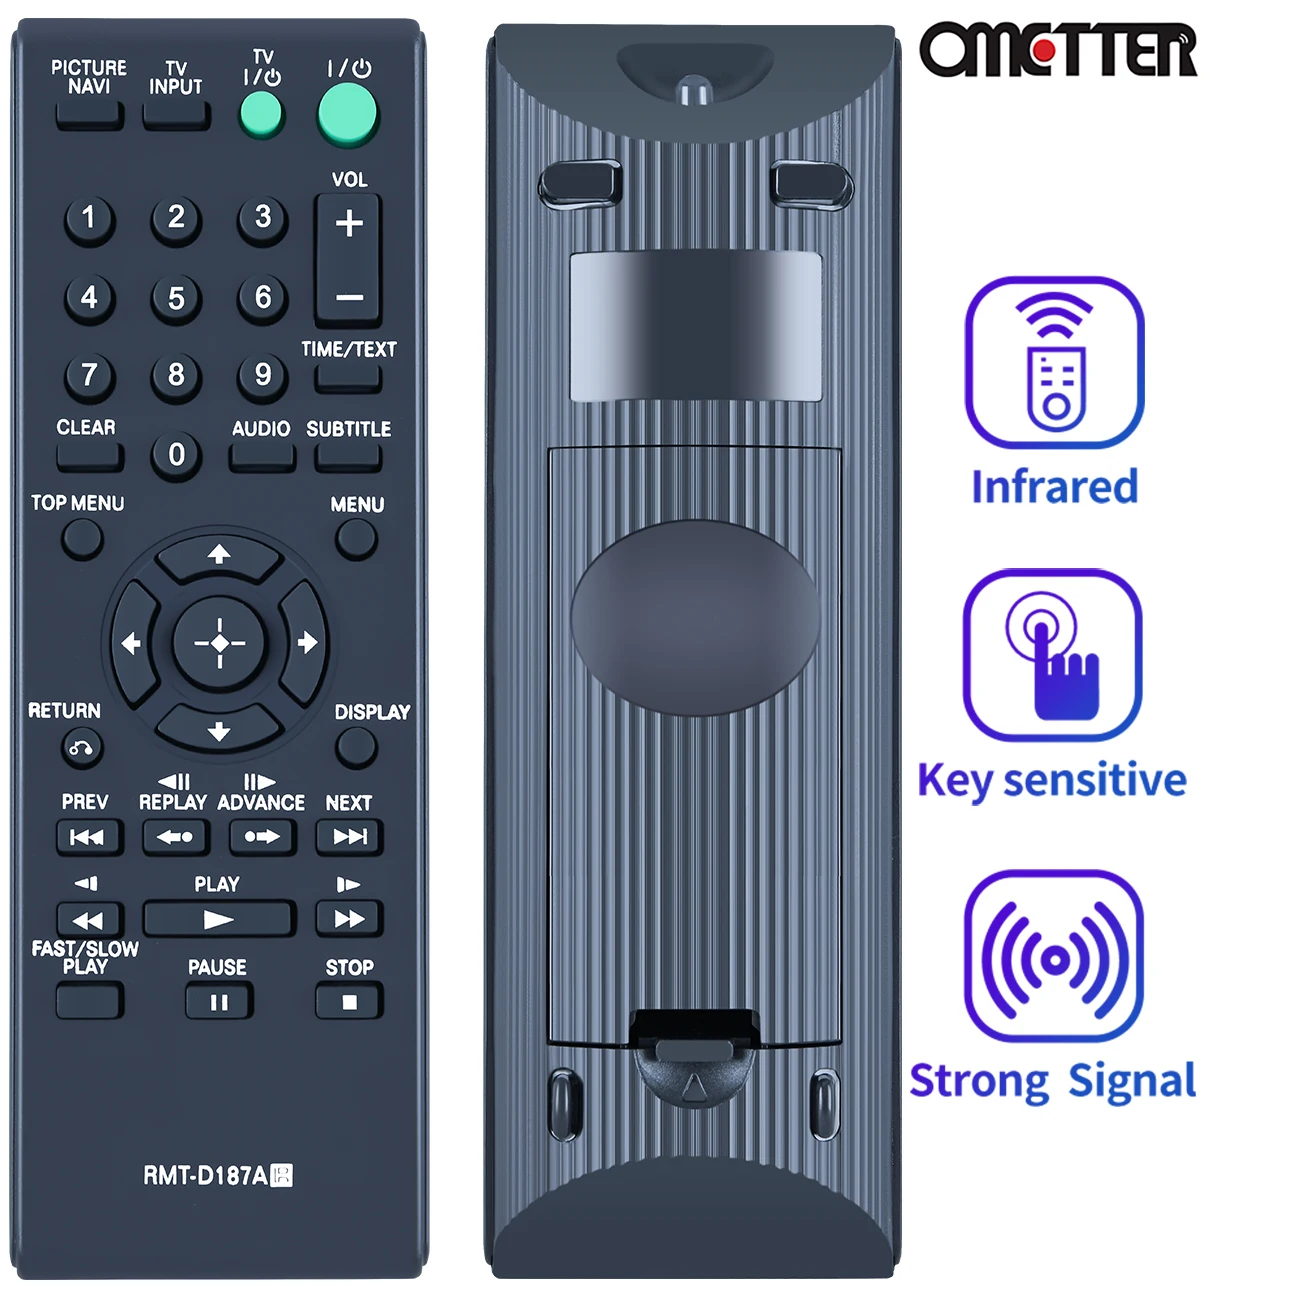 RMT-D187A Remote Control Fit for Sony DVD CD Player DVP-NS718H DVP-SR500H DVP-SR101P DVP-SR200P DVP-SR401HP DVP-NS710H DVP-SR400